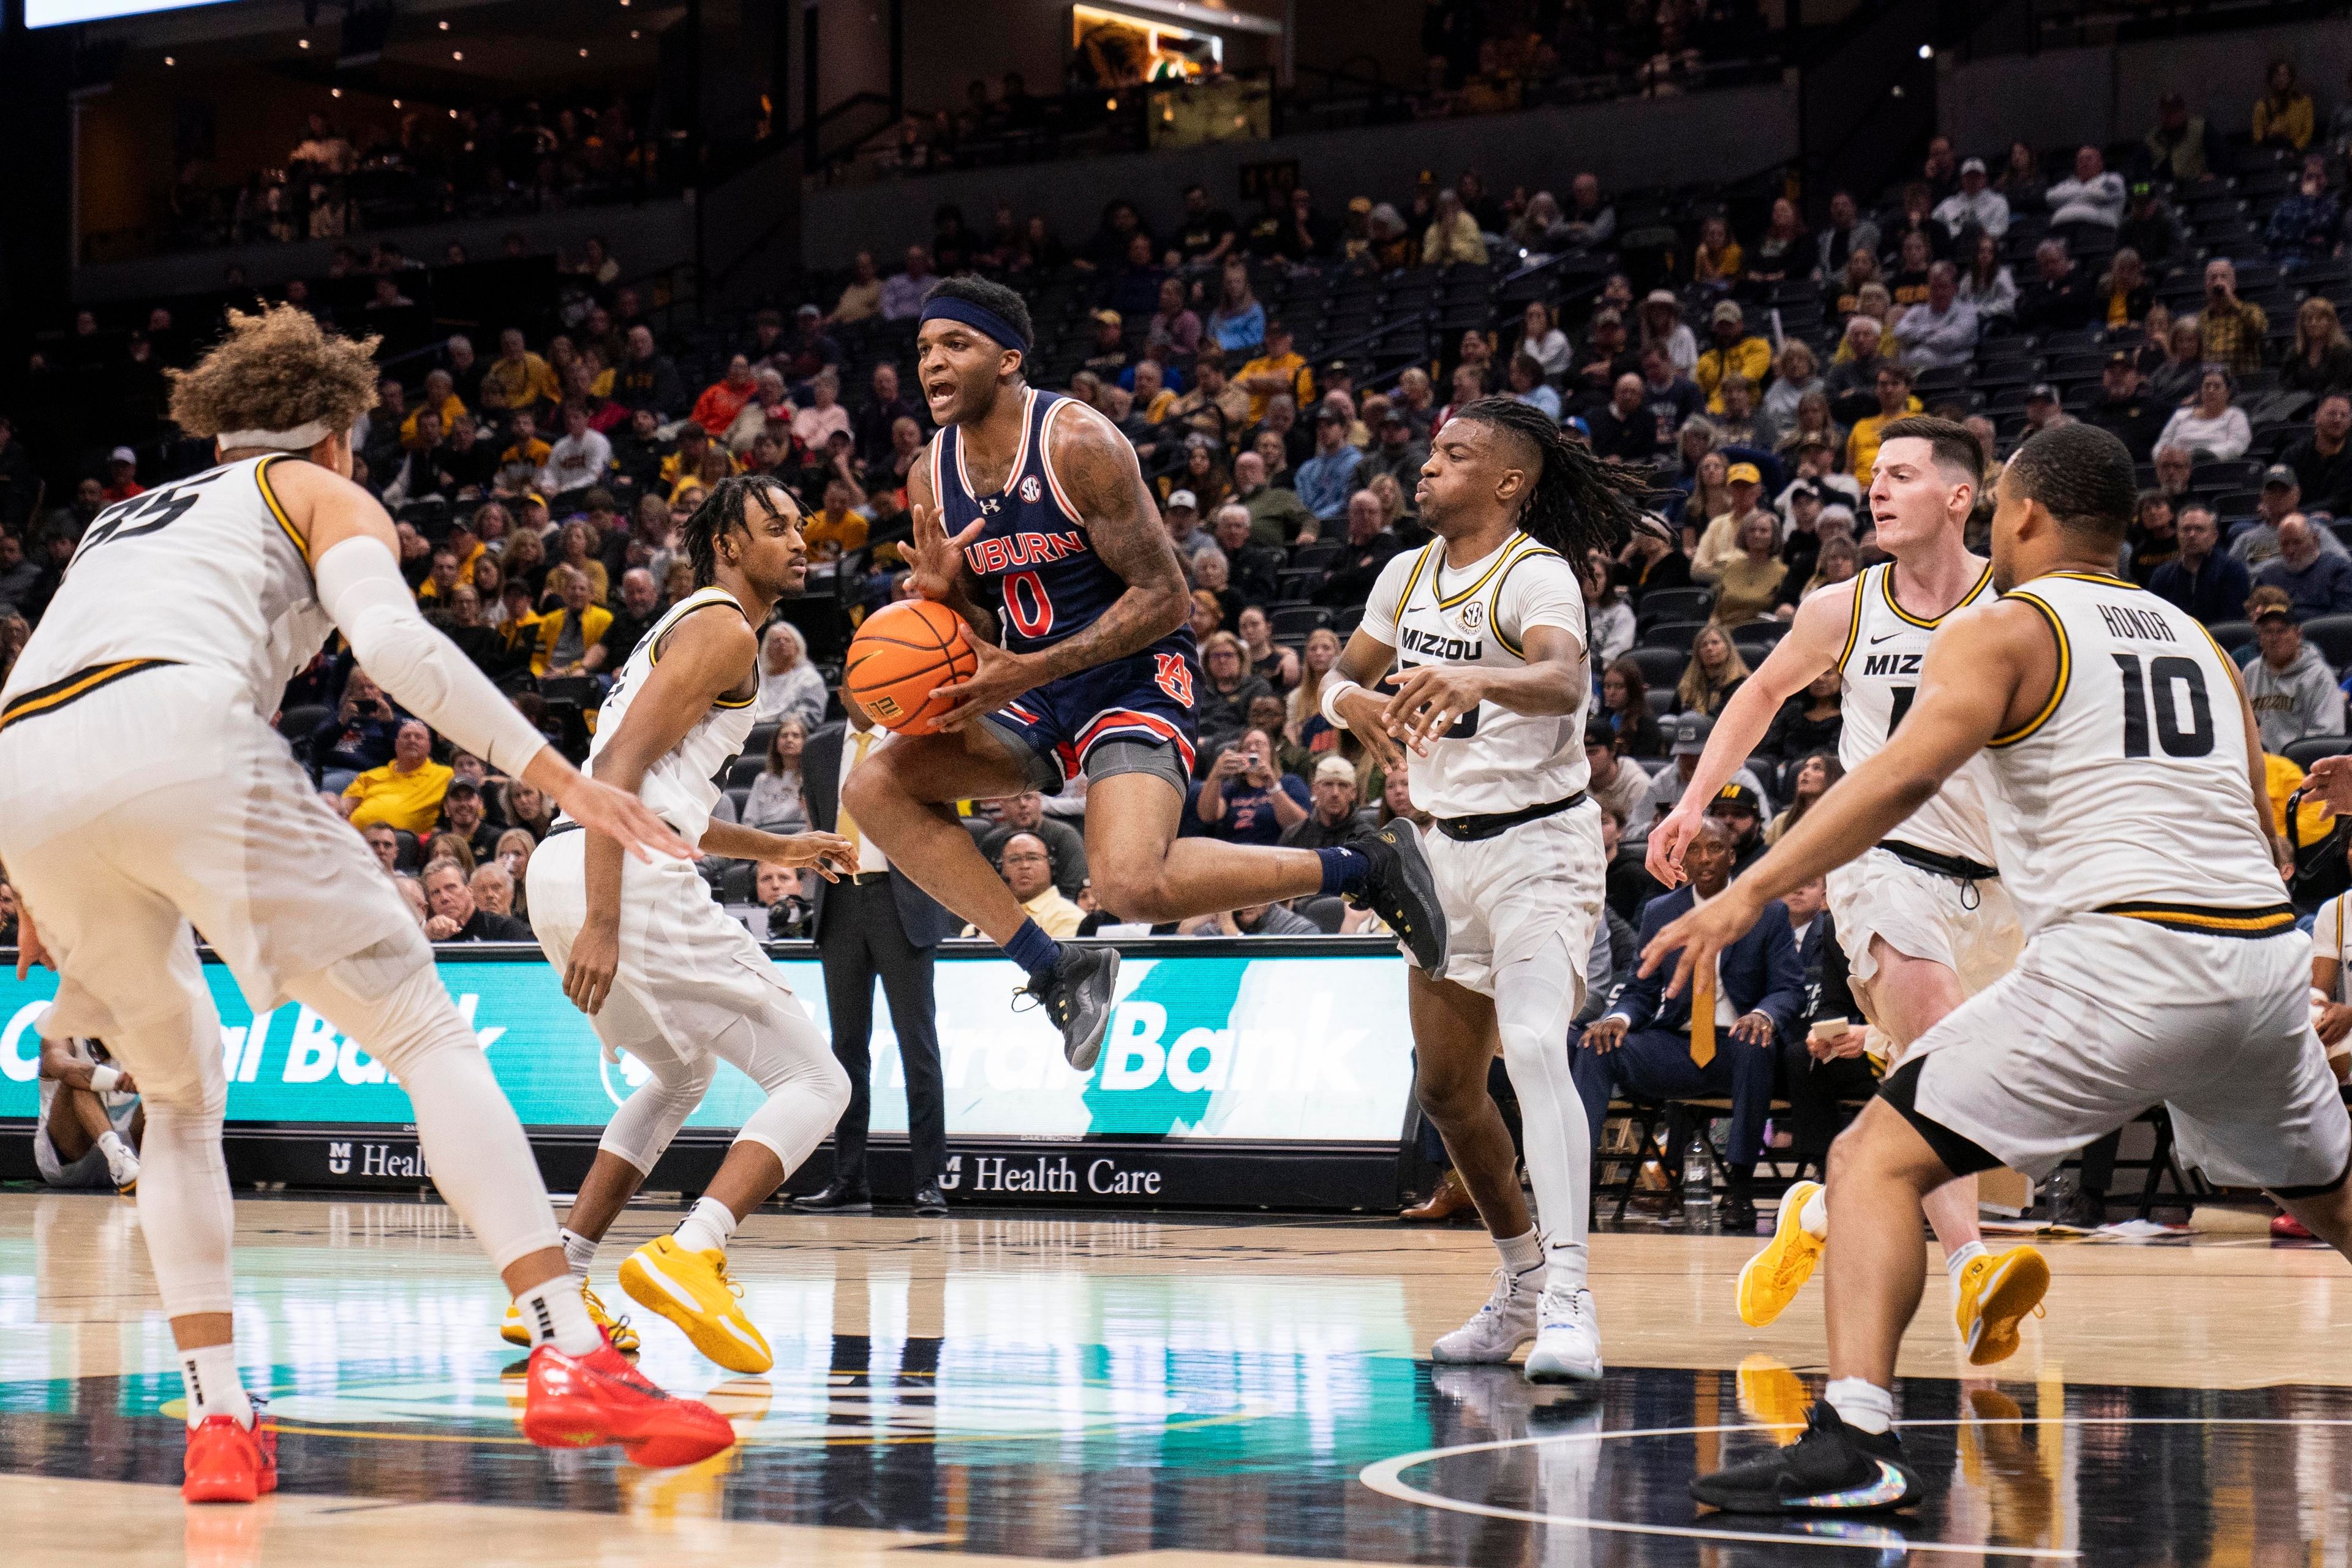 Auburn's K.D. Johnson, center, leaps as he passes while surrounded by Missouri players during the first half of an NCAA college basketball game Tuesday, March 5, 2024, in Columbia, Mo. (AP Photo/L.G. Patterson)